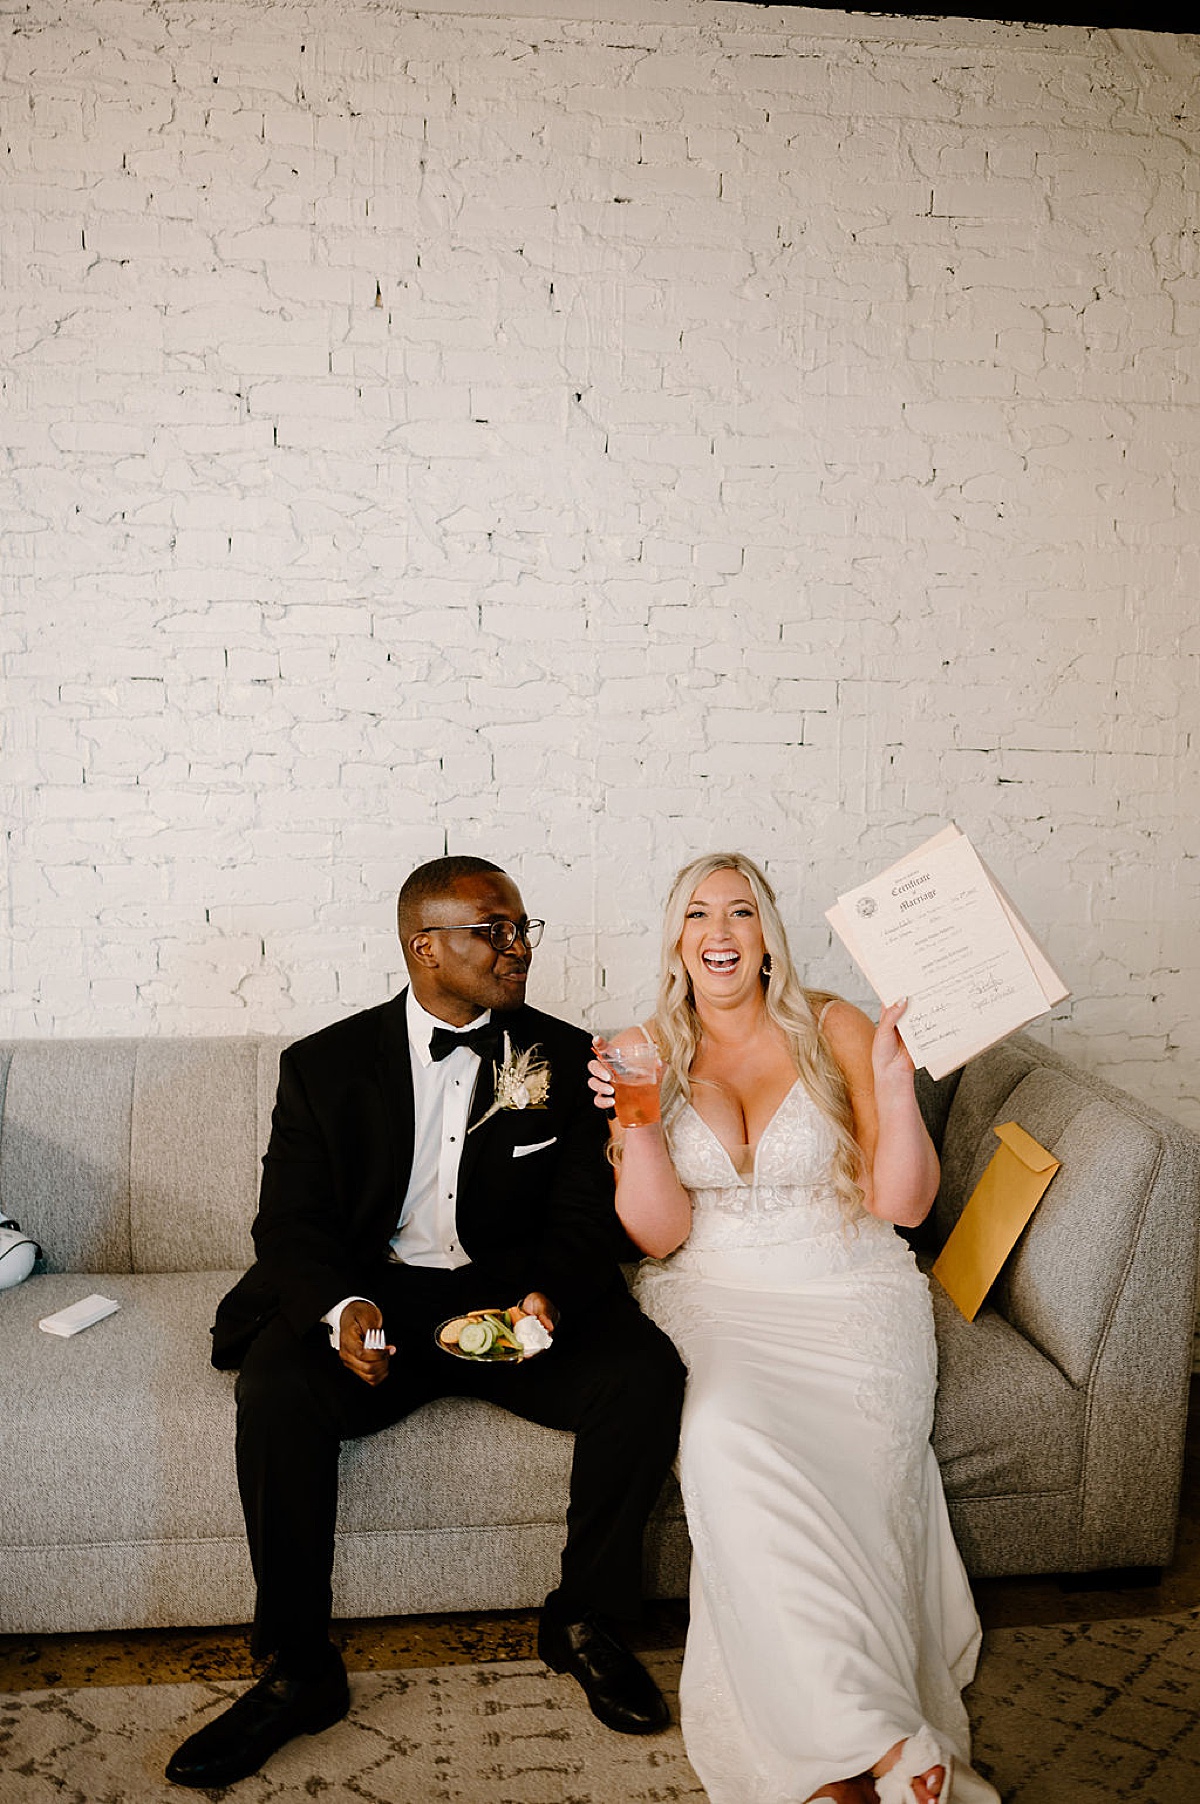 bride and groom share cocktails and appetizers as they show off signed matrimony papers after sunny Paper Mills ceremony